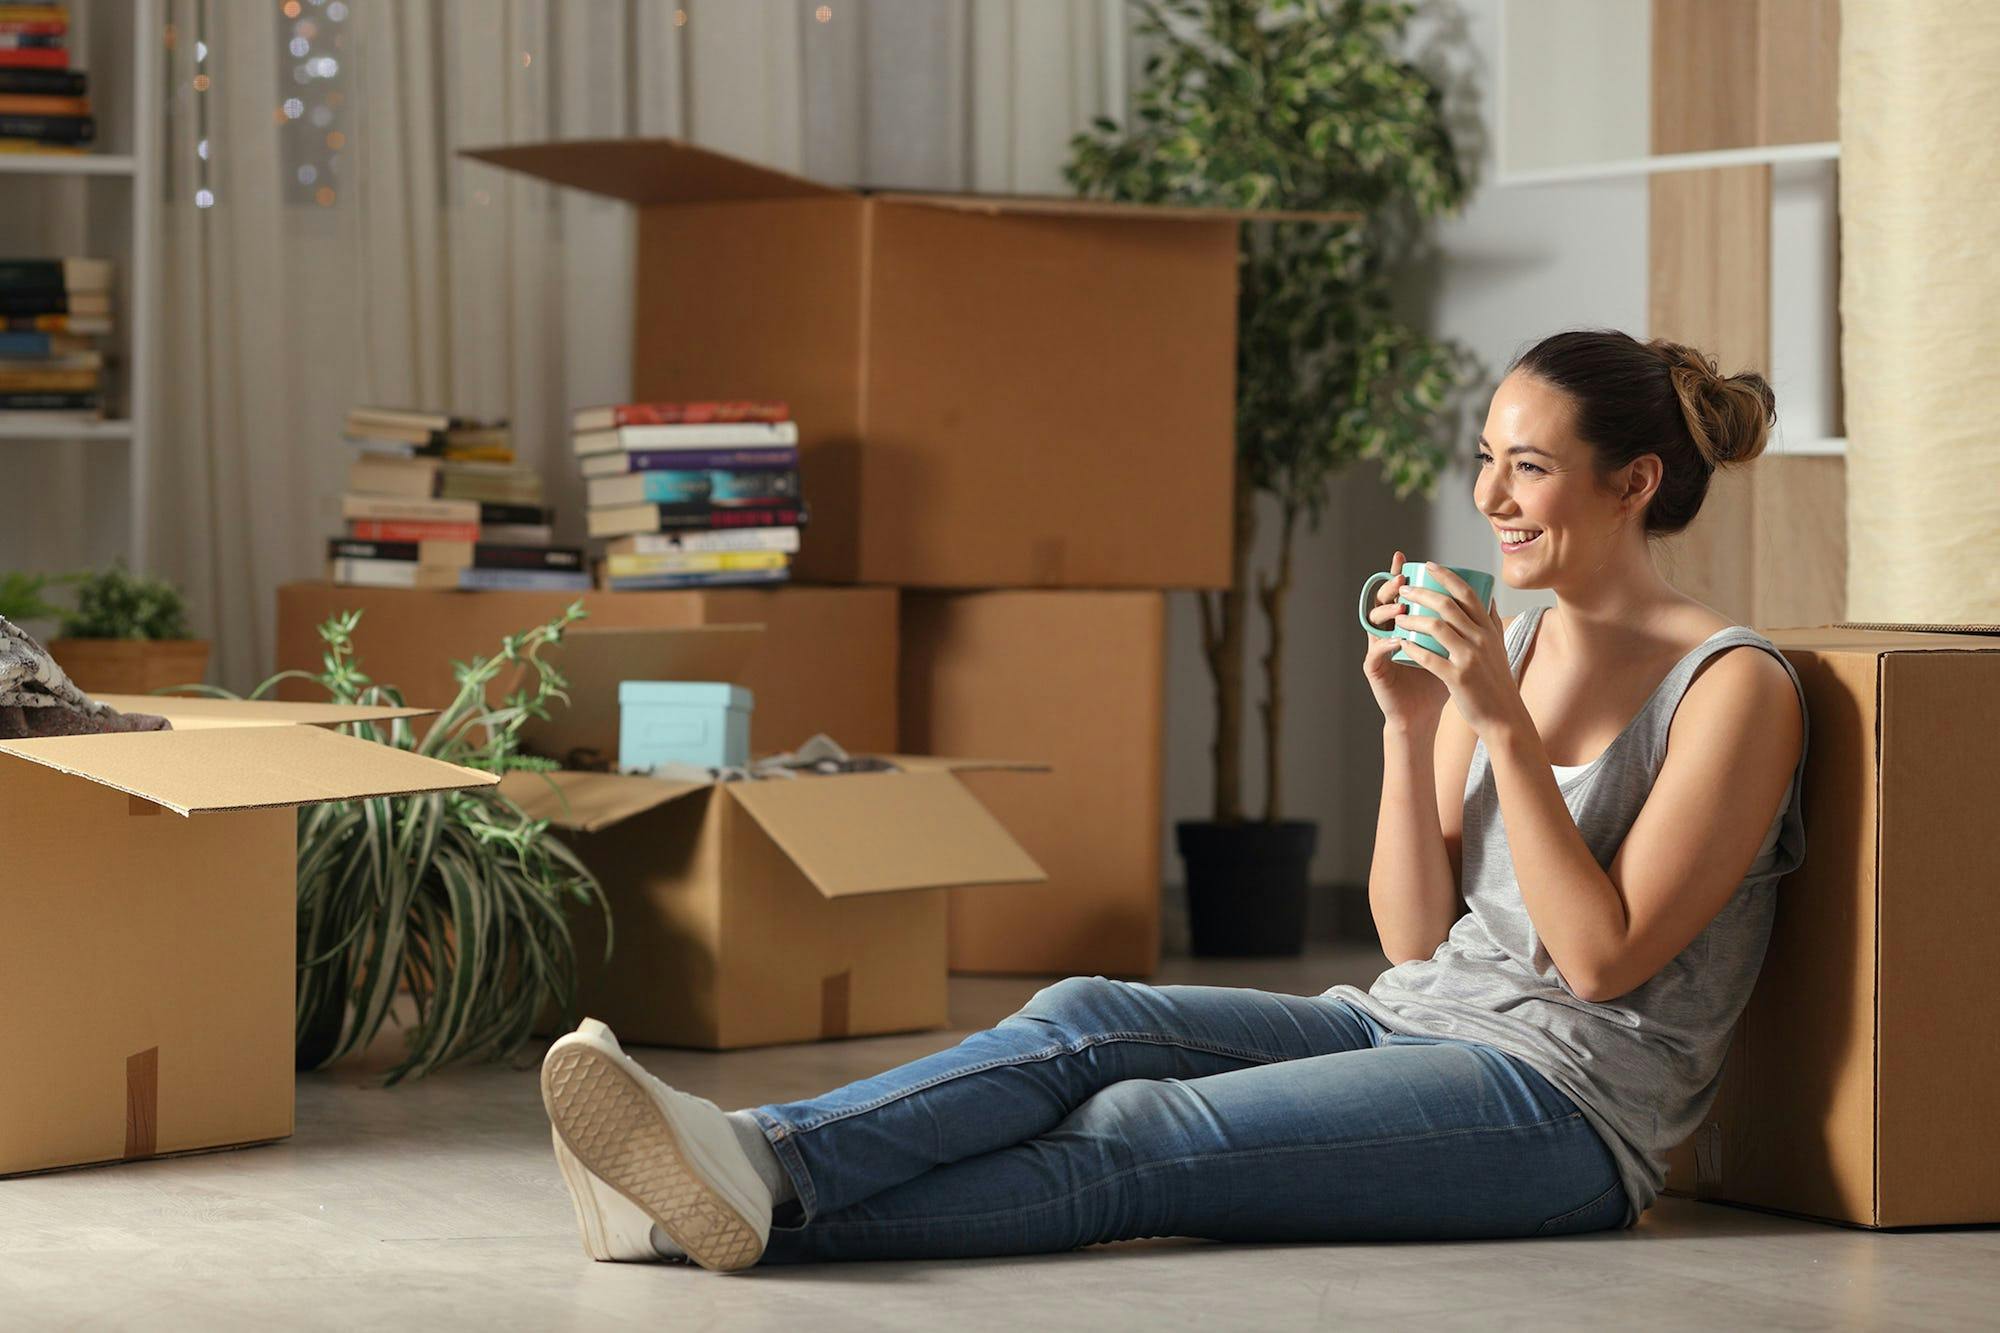 A woman enjoys a cup of tea against a moving box as she takes a break from unpacking belongings in a new rental home